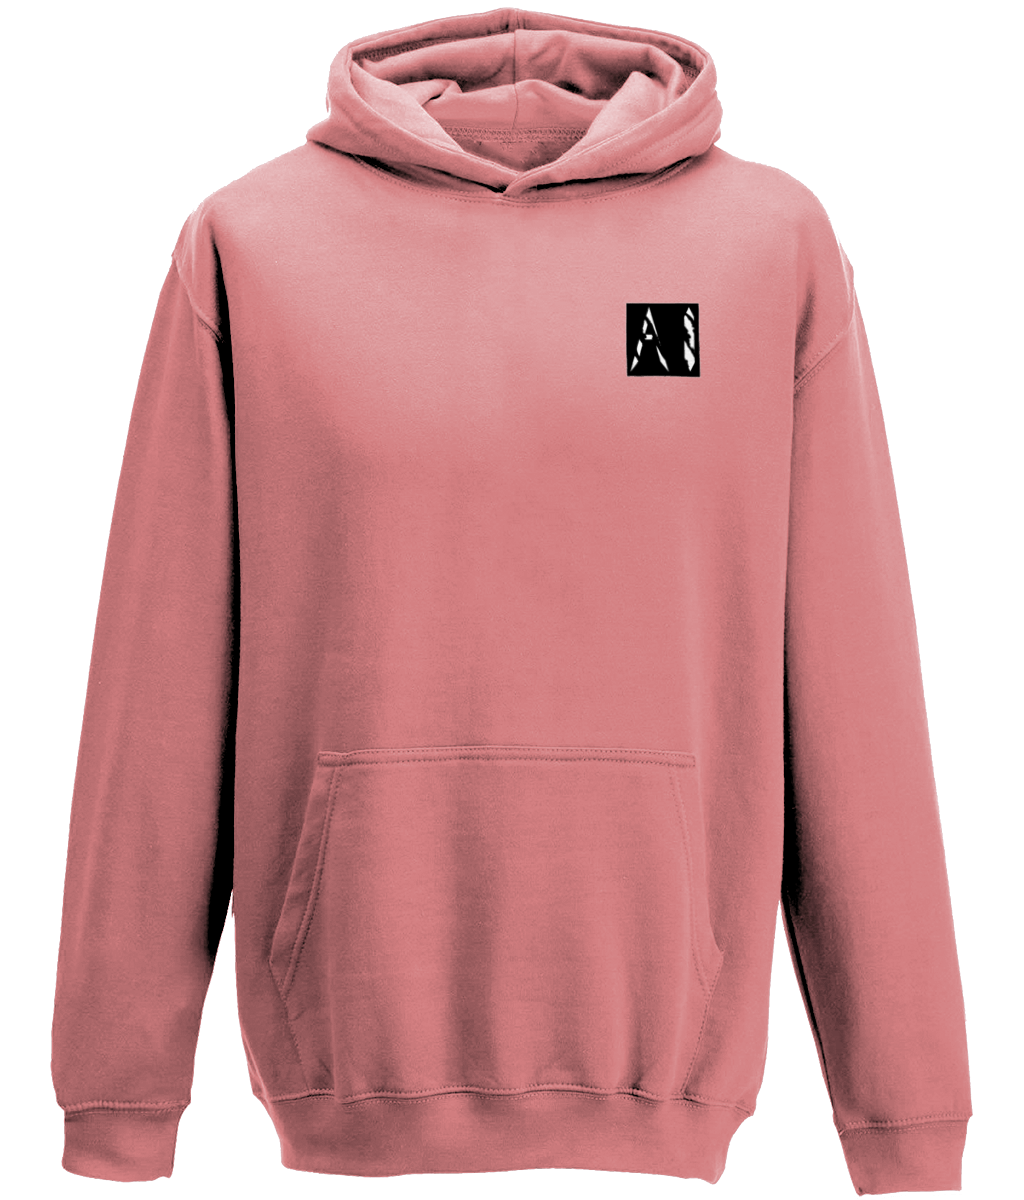 Animal Instinct Signature Box Logo pink Hoodie with white AI logo within a black box located on the left chest